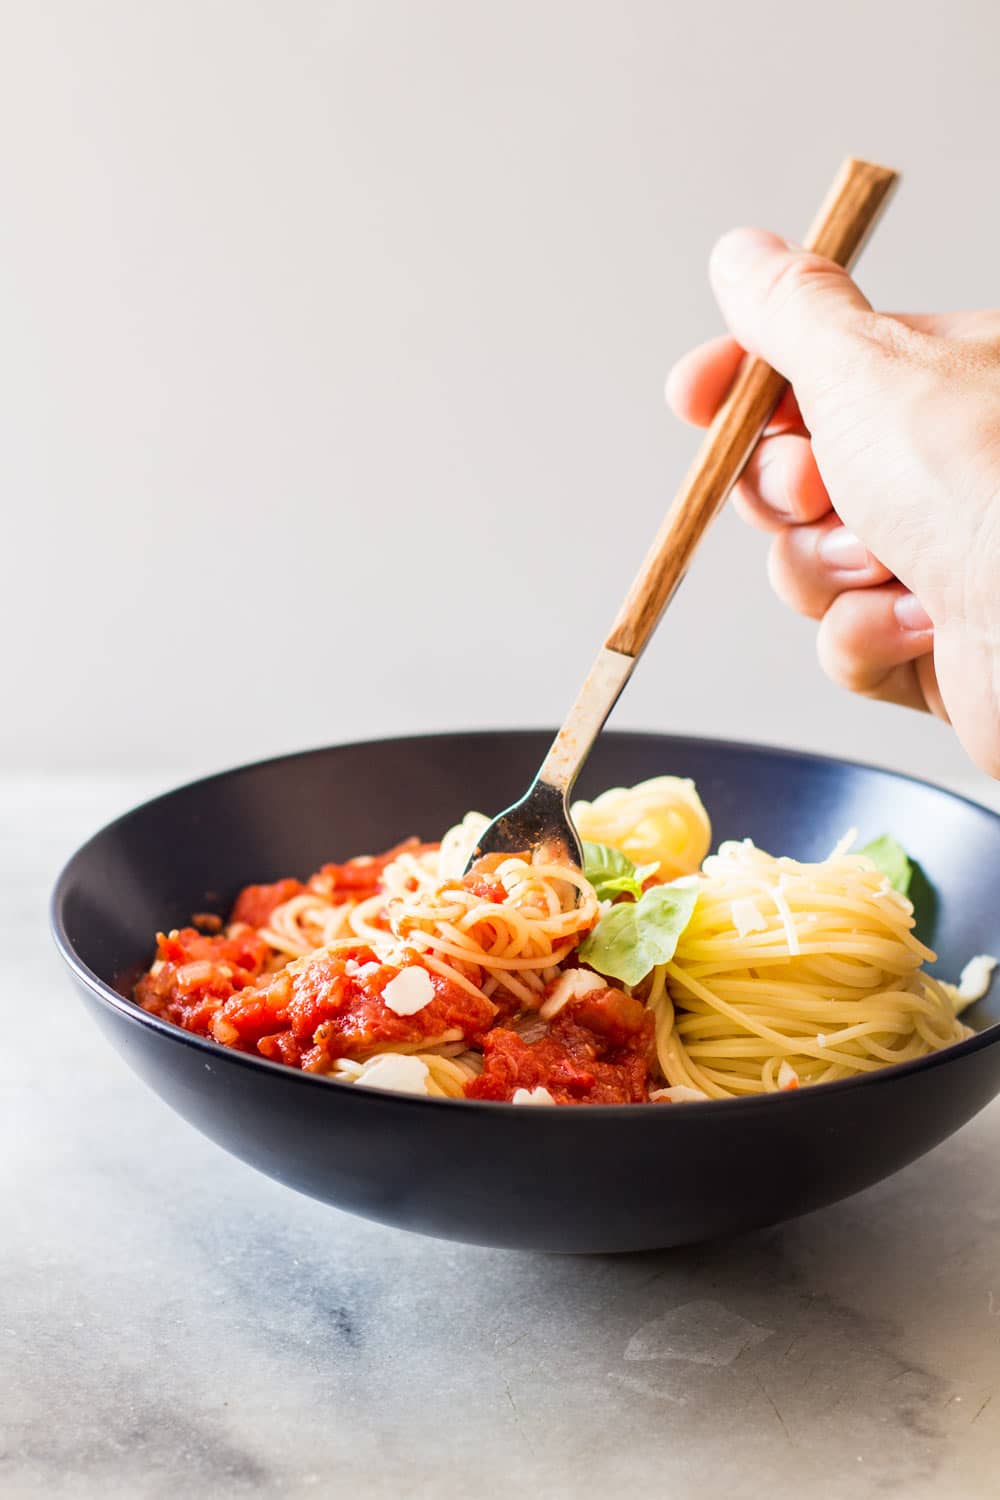 Hand grabbing some Capellini pasta with Roasted Garlic Tomato Sauce with a fork.